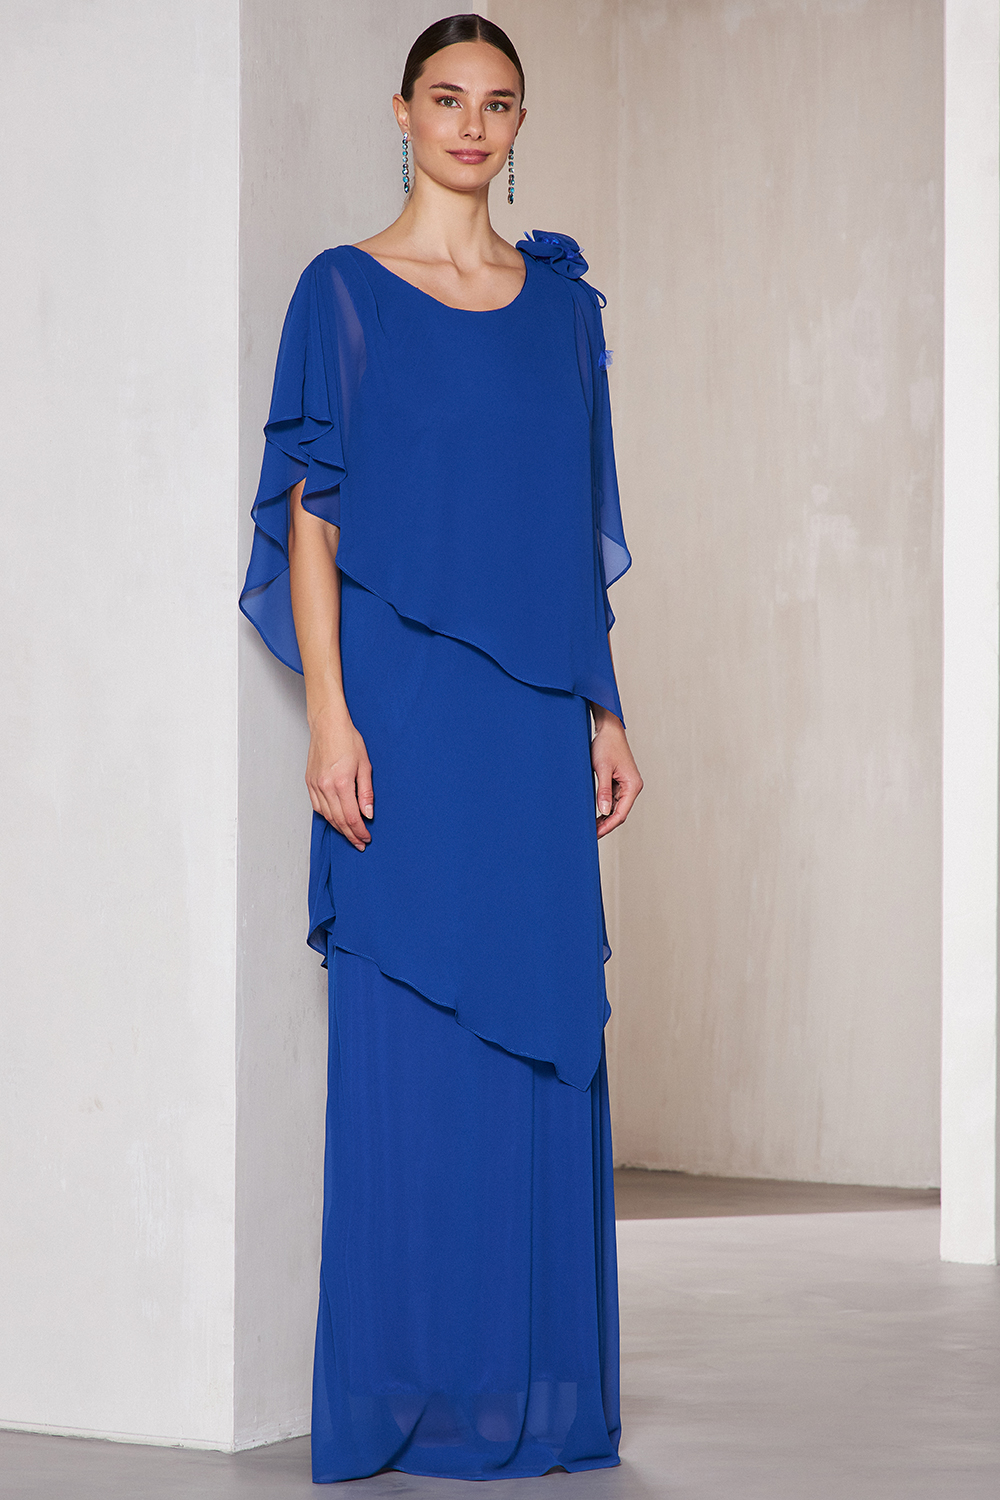 Classic Dresses / Long evening dress with chiffon for the mother of the bride